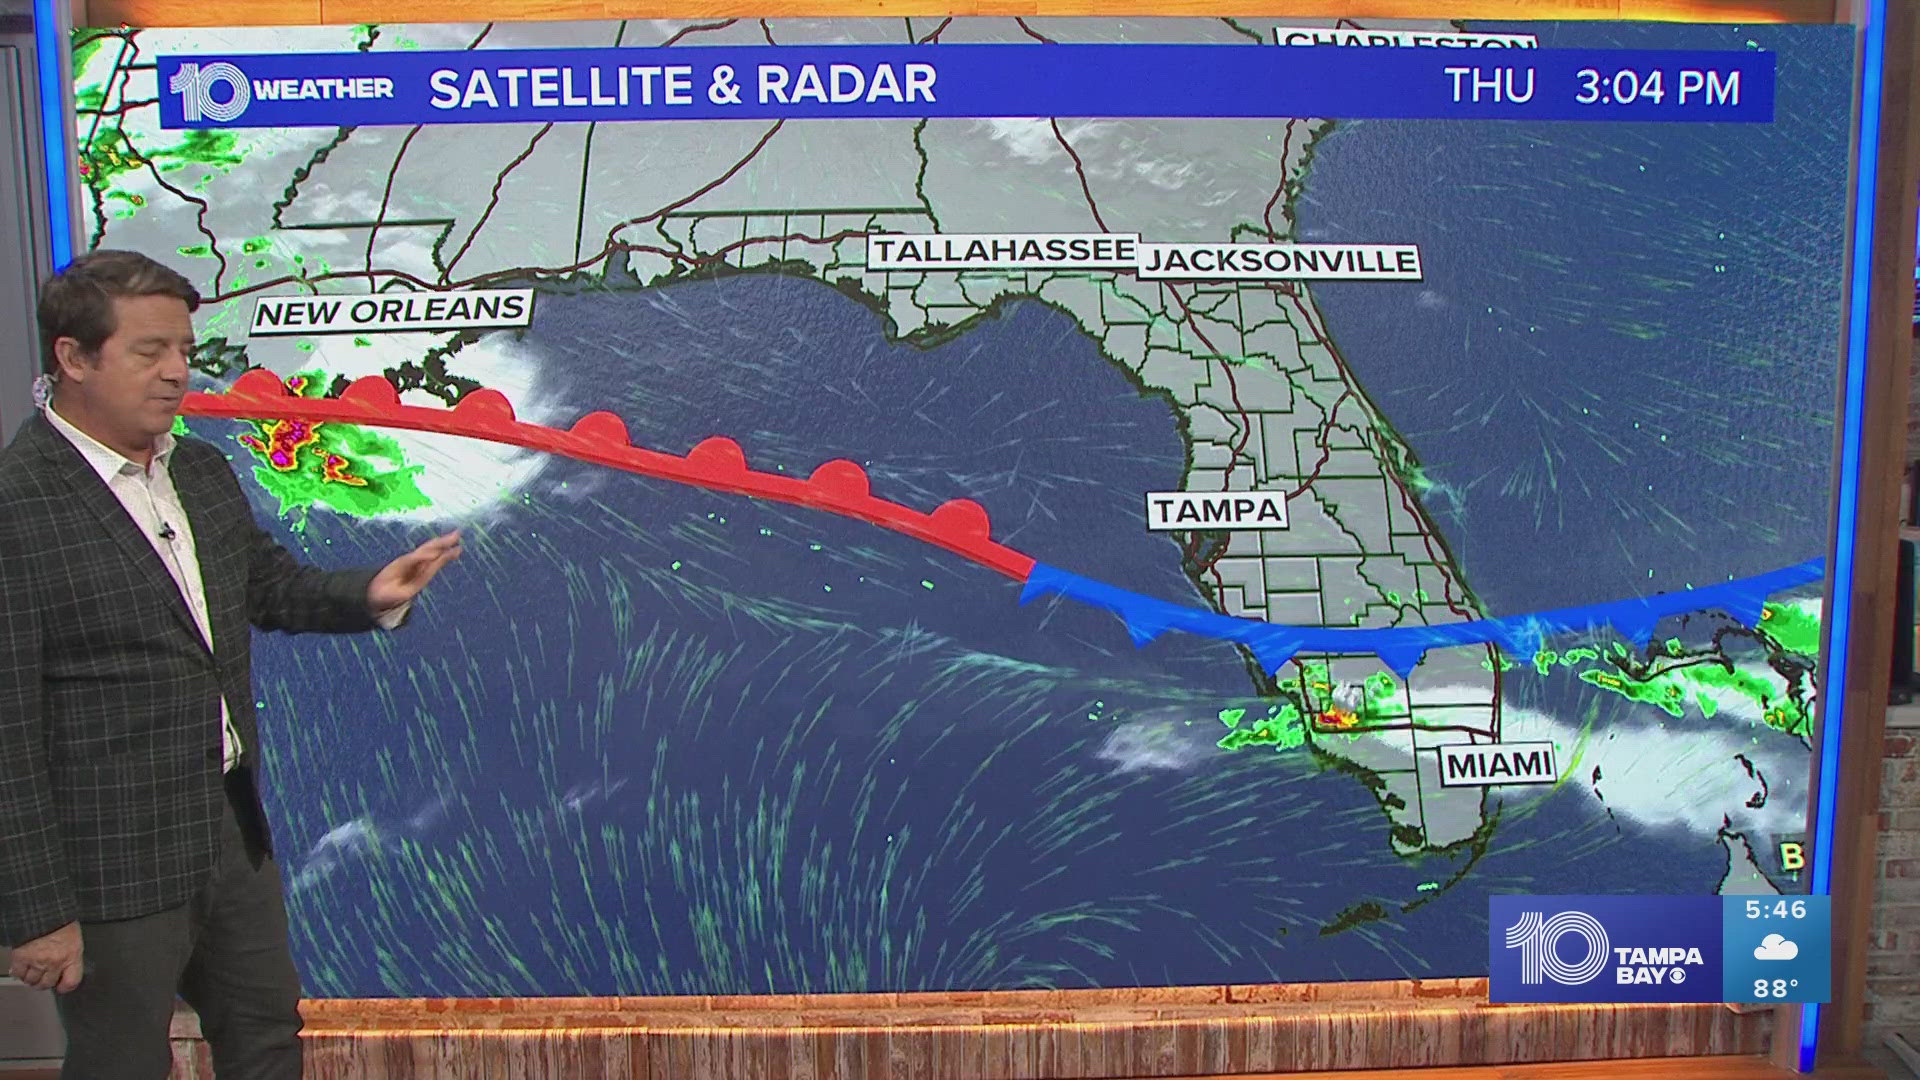 10 Tampa Bay Chief Meteorologist Bobby Deskins has the latest forecast for the Tampa Bay area.